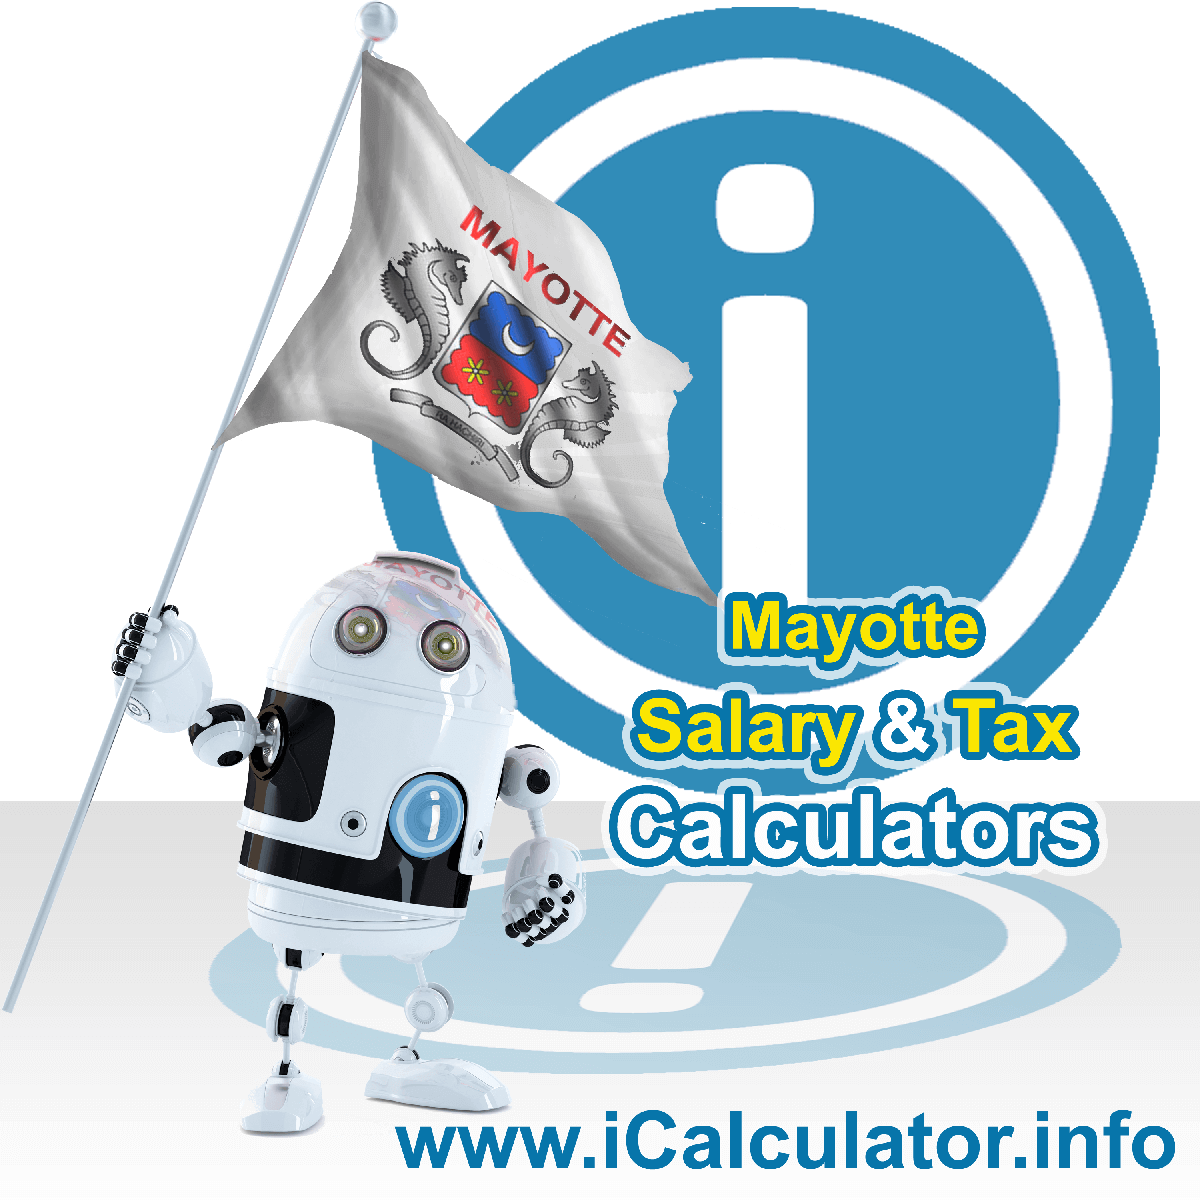 Mayotte Tax Calculator. This image shows the Mayotte flag and information relating to the tax formula for the Mayotte Salary Calculator